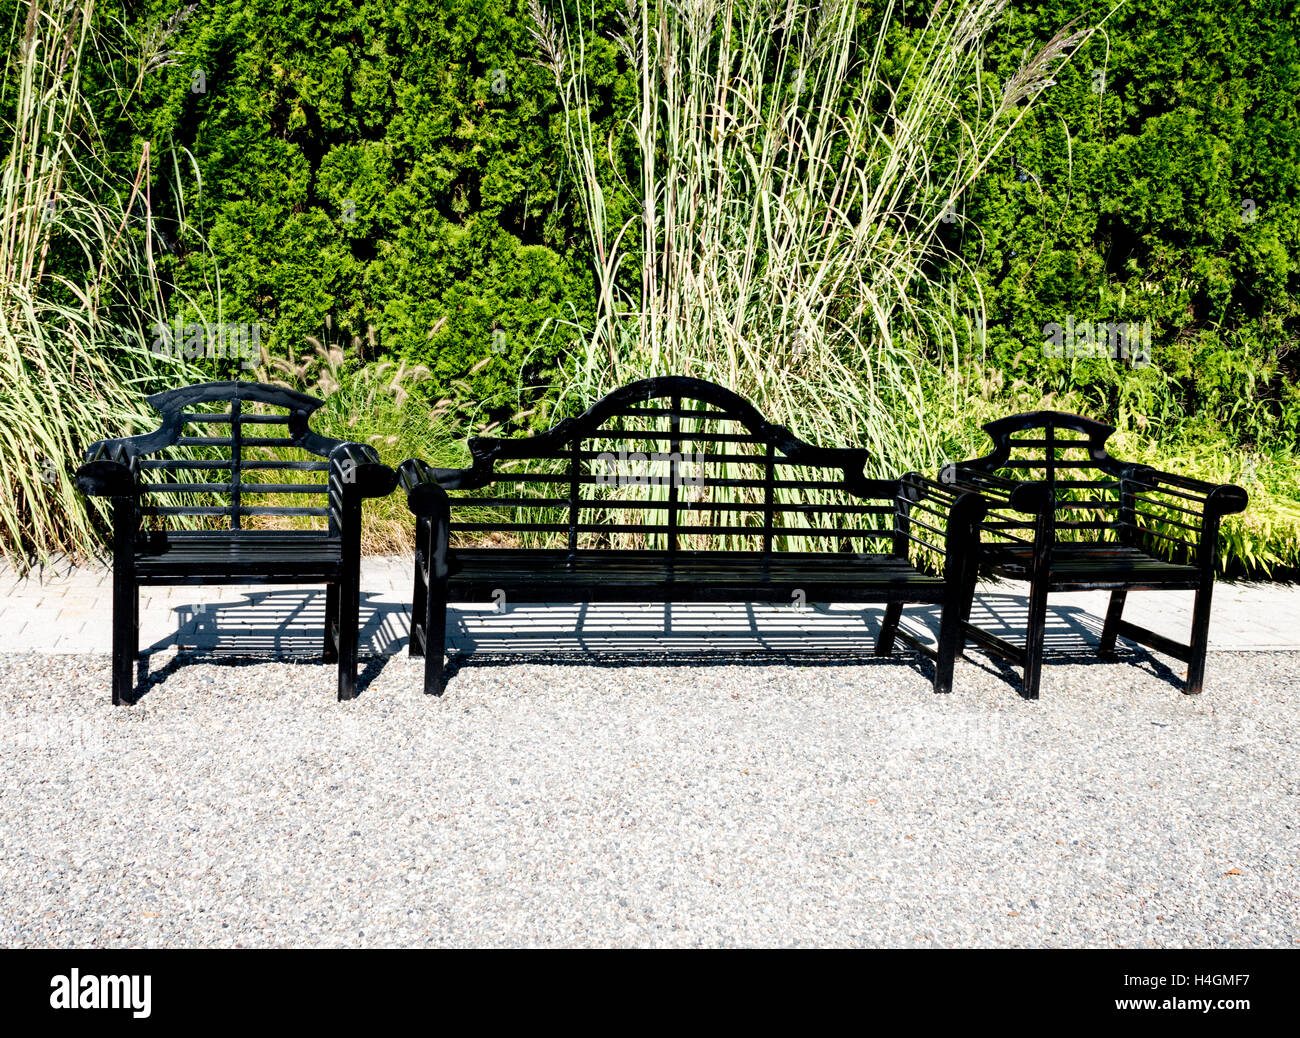 Black benches in the park of Grounds for Sculpture in Hamilton, NJ. Stock Photo